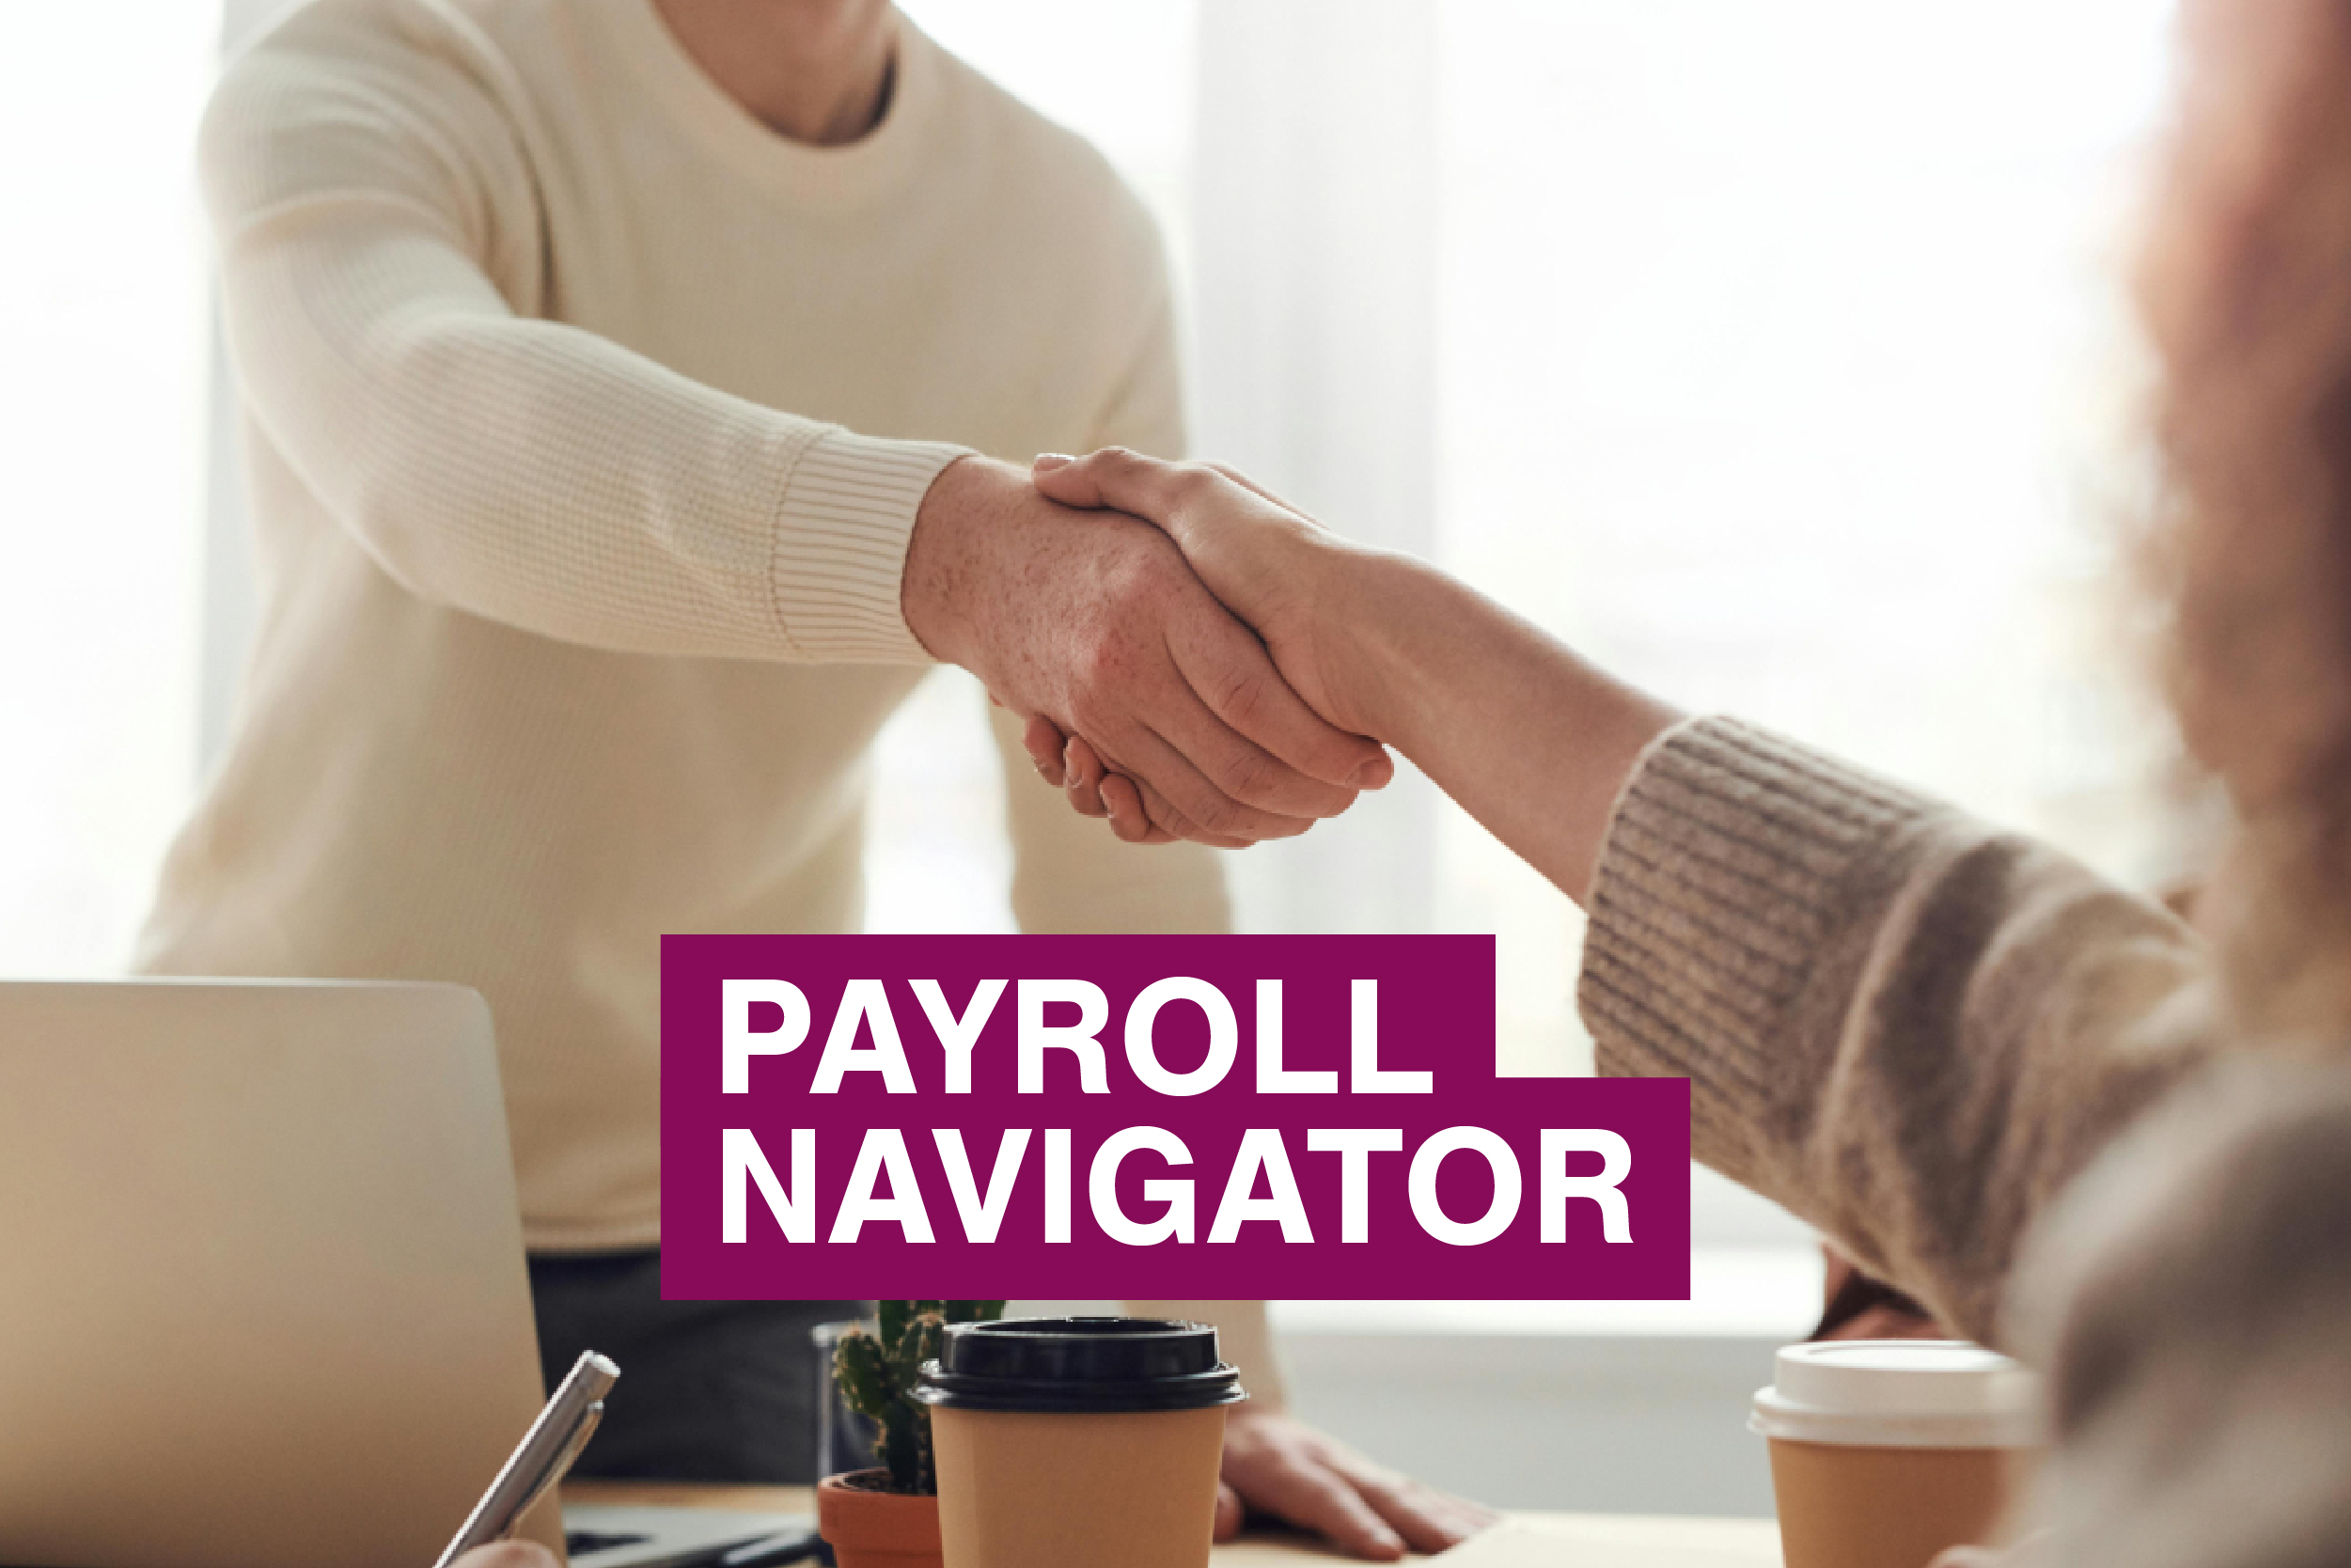 What matters most to employees regarding payroll